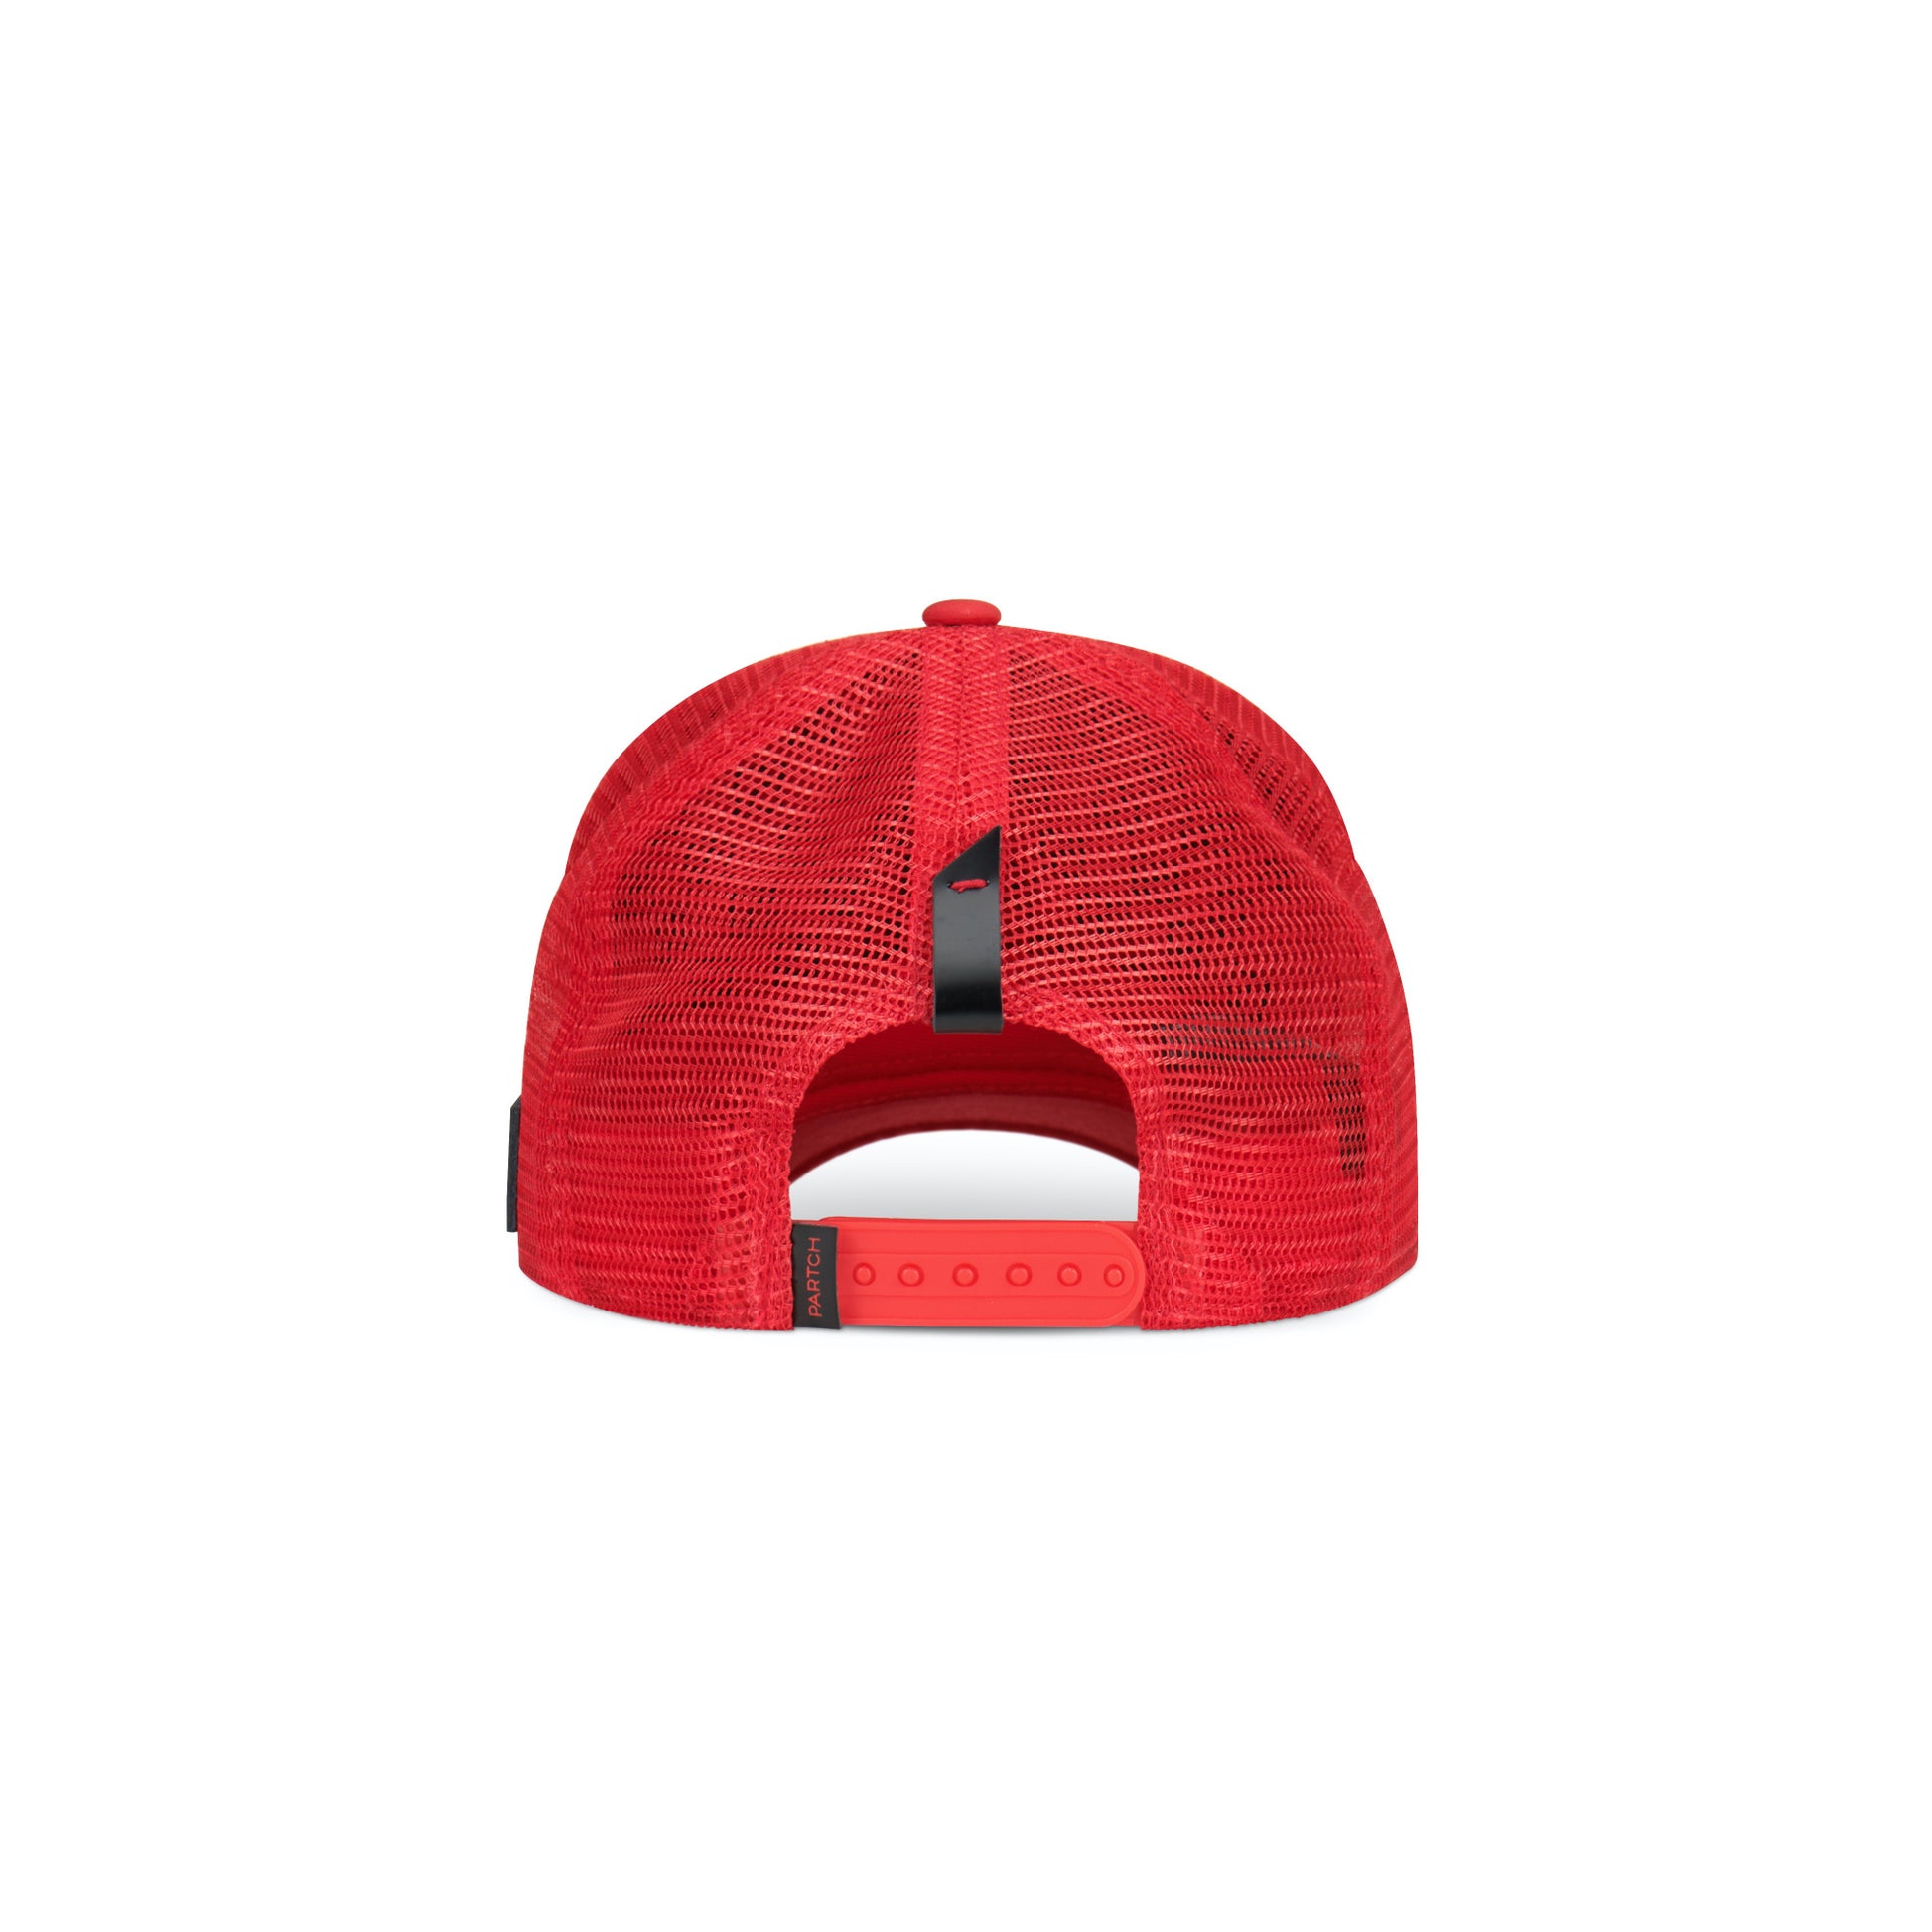 Partch back trucker hat mesh breathable in red